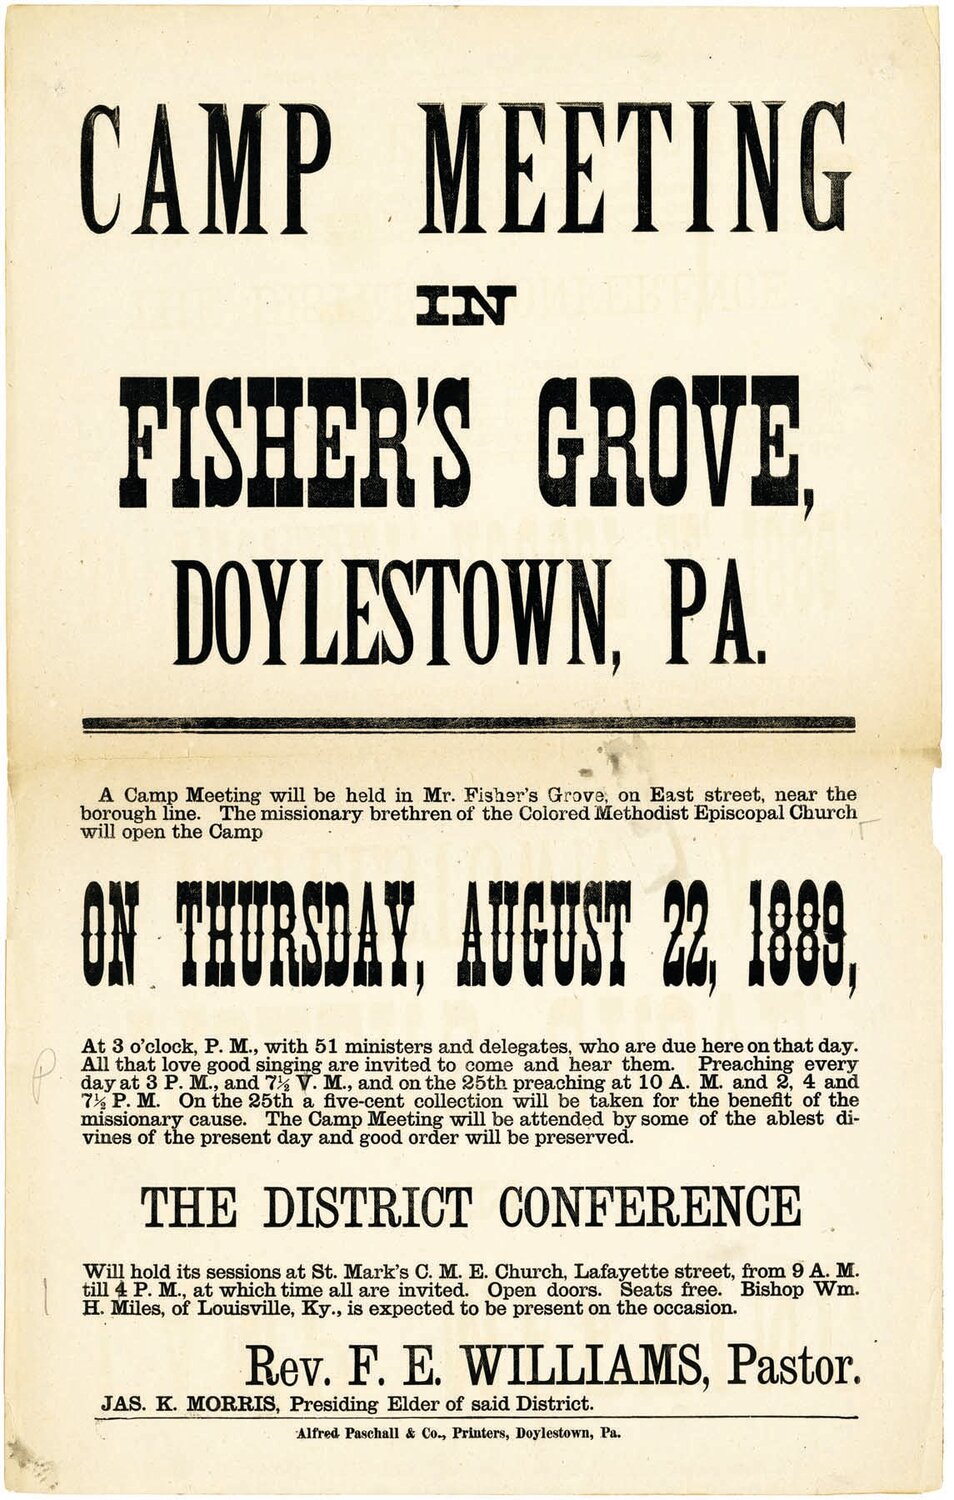 A broadside promotes an 1889 revival gathering in Doylestown.